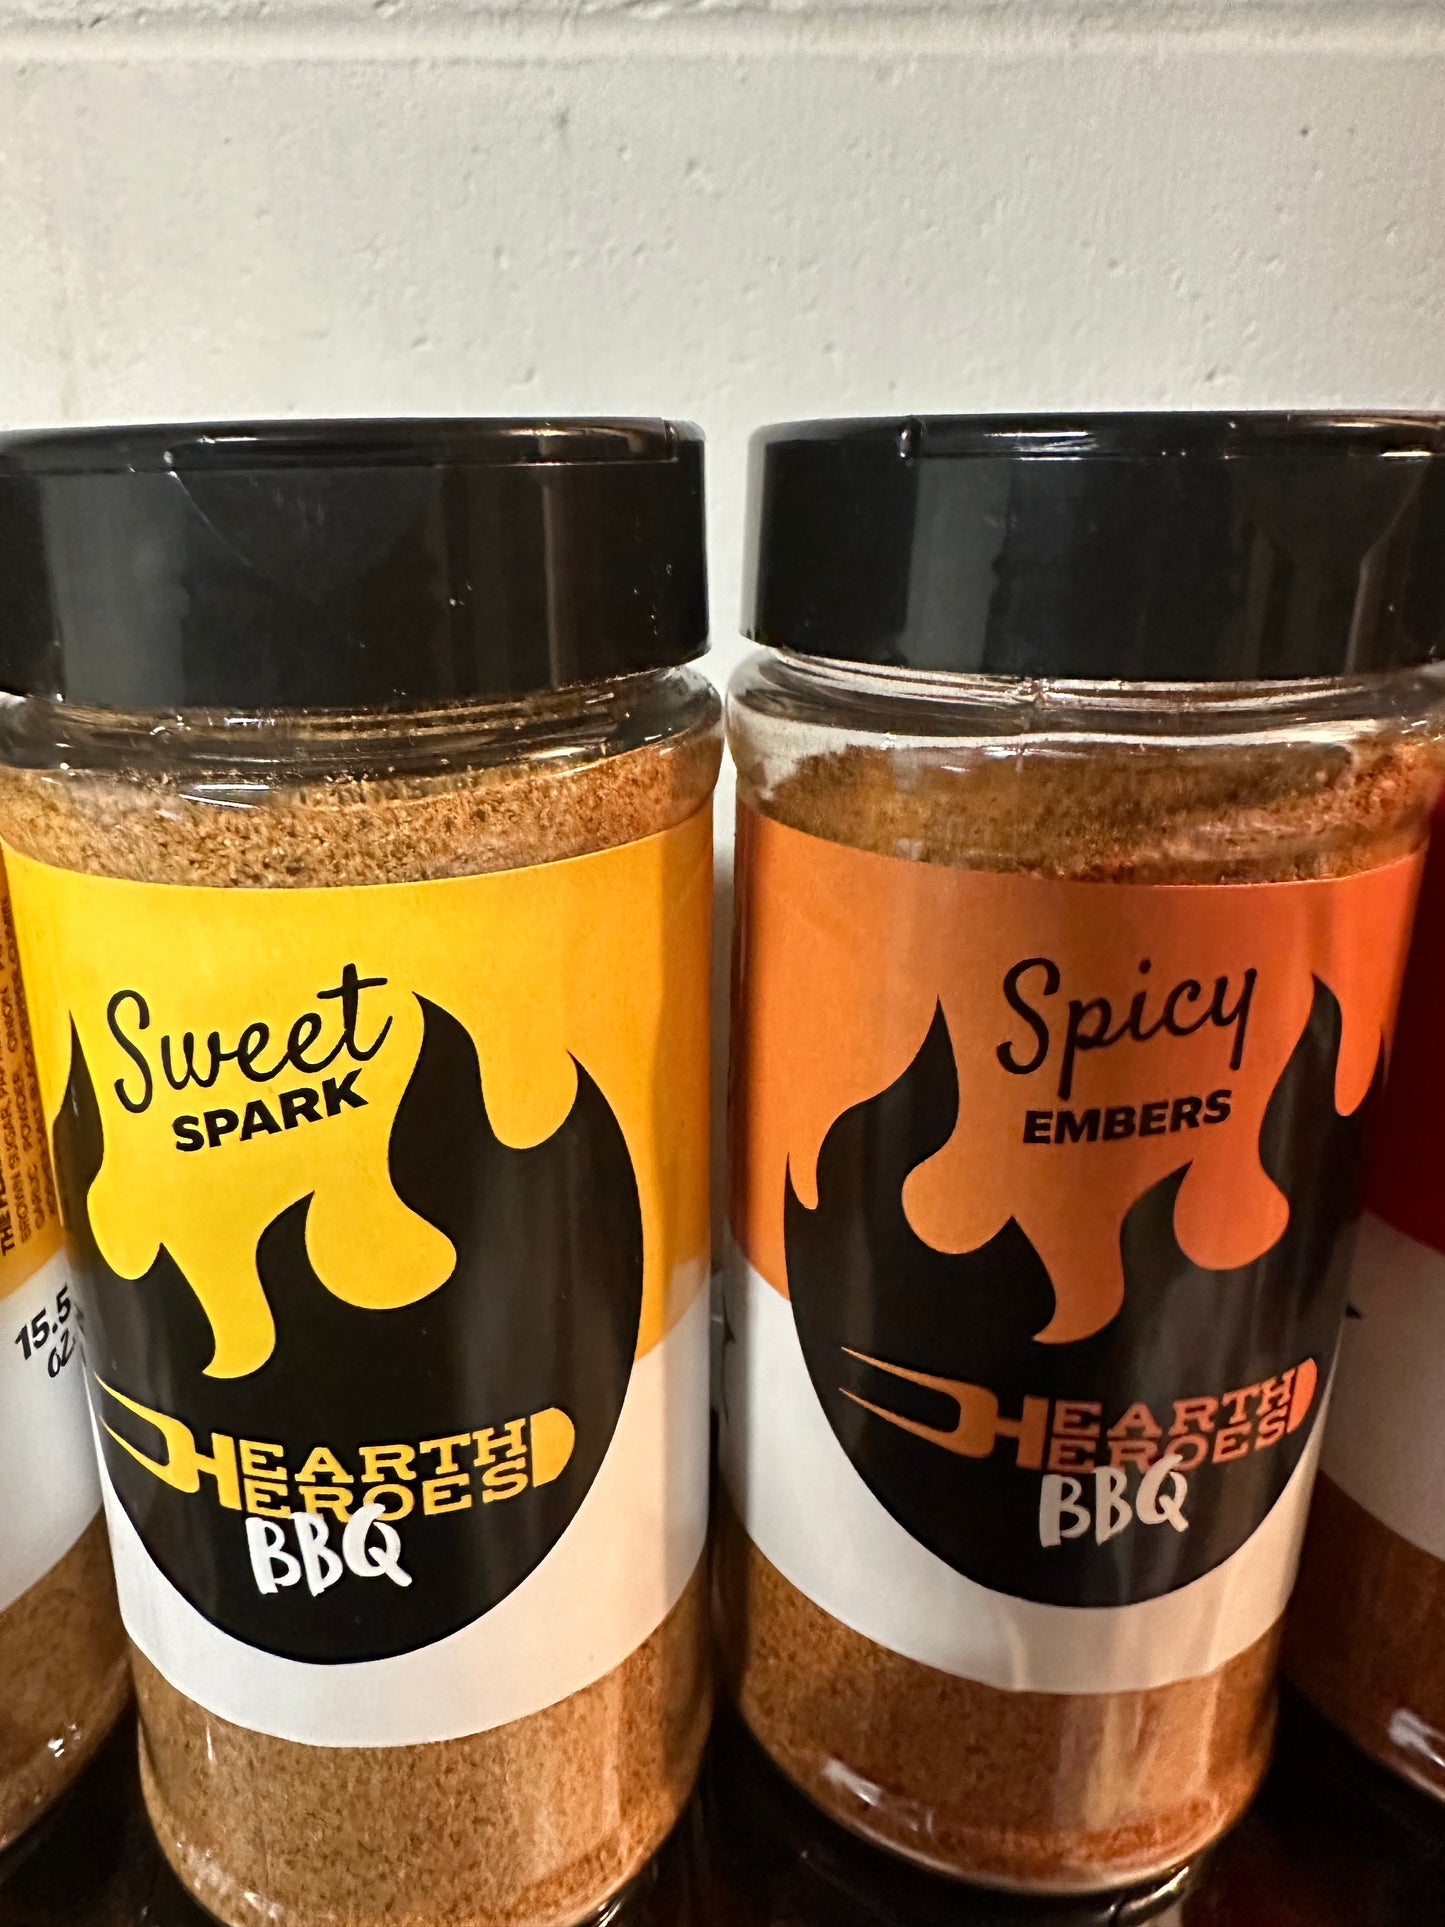 1 Sweet spark & 1 Spicy embers gift pack